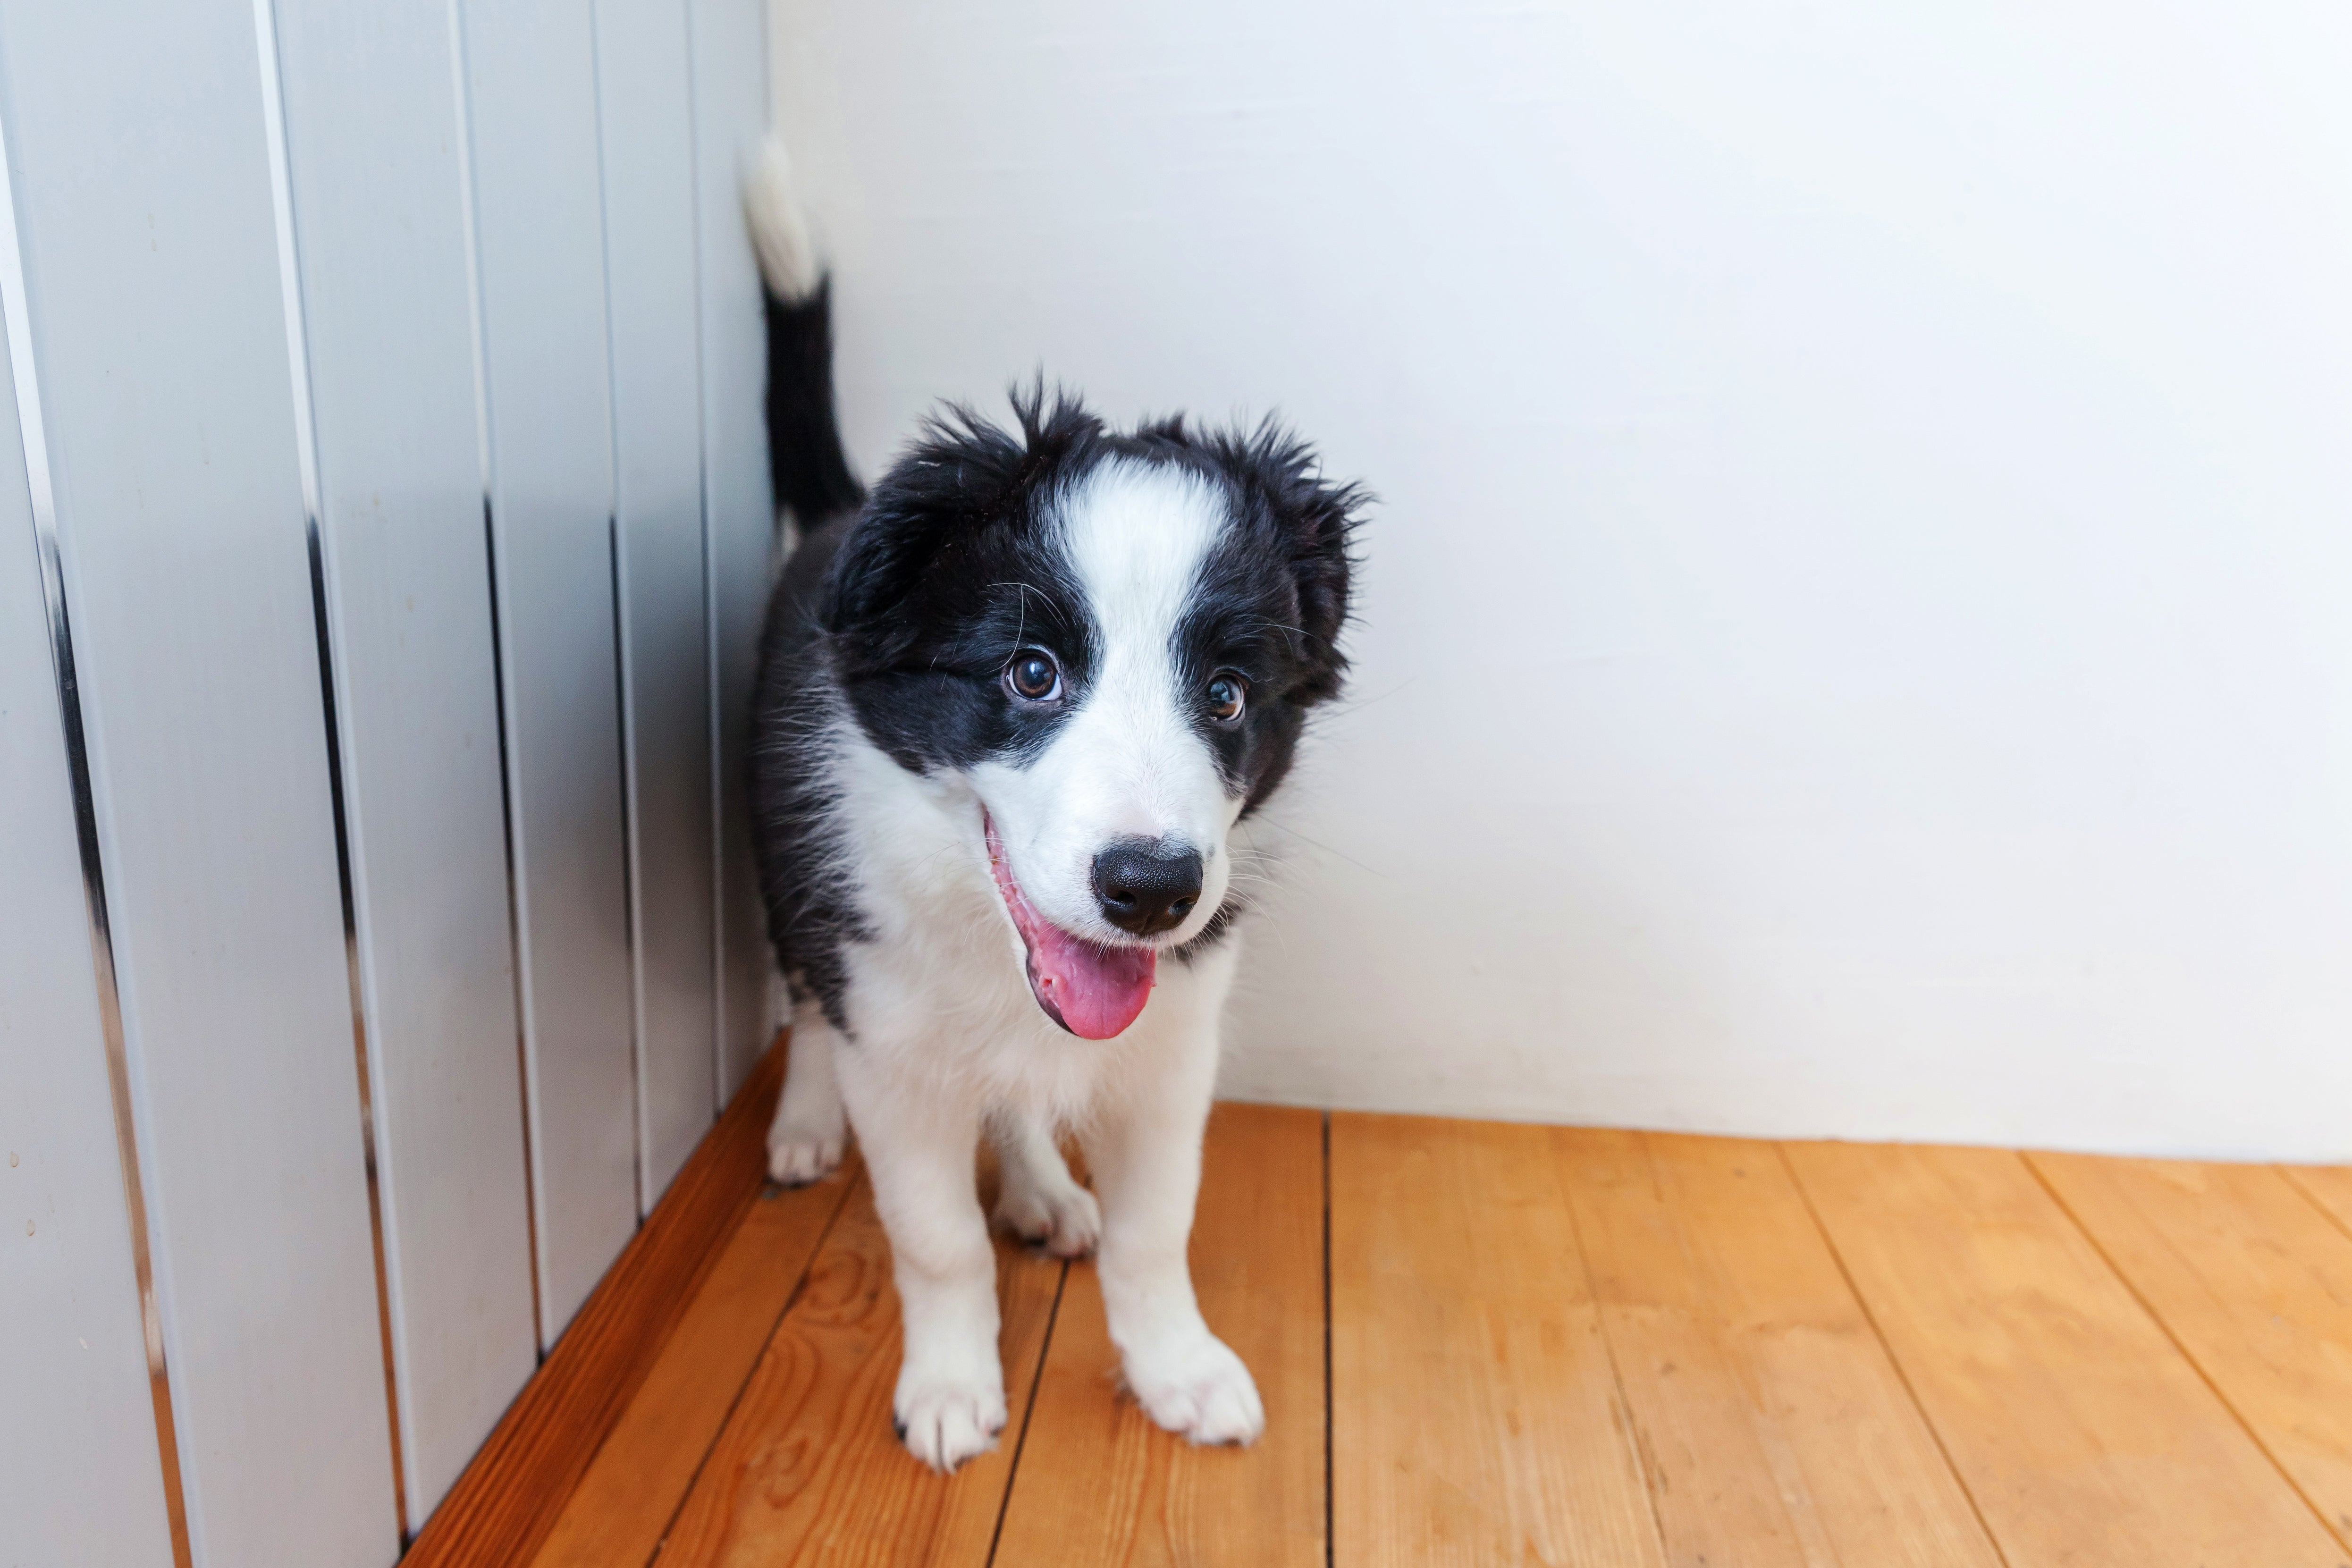 Your Puppy's First Night: 5 Top Tips for Getting them Settled In